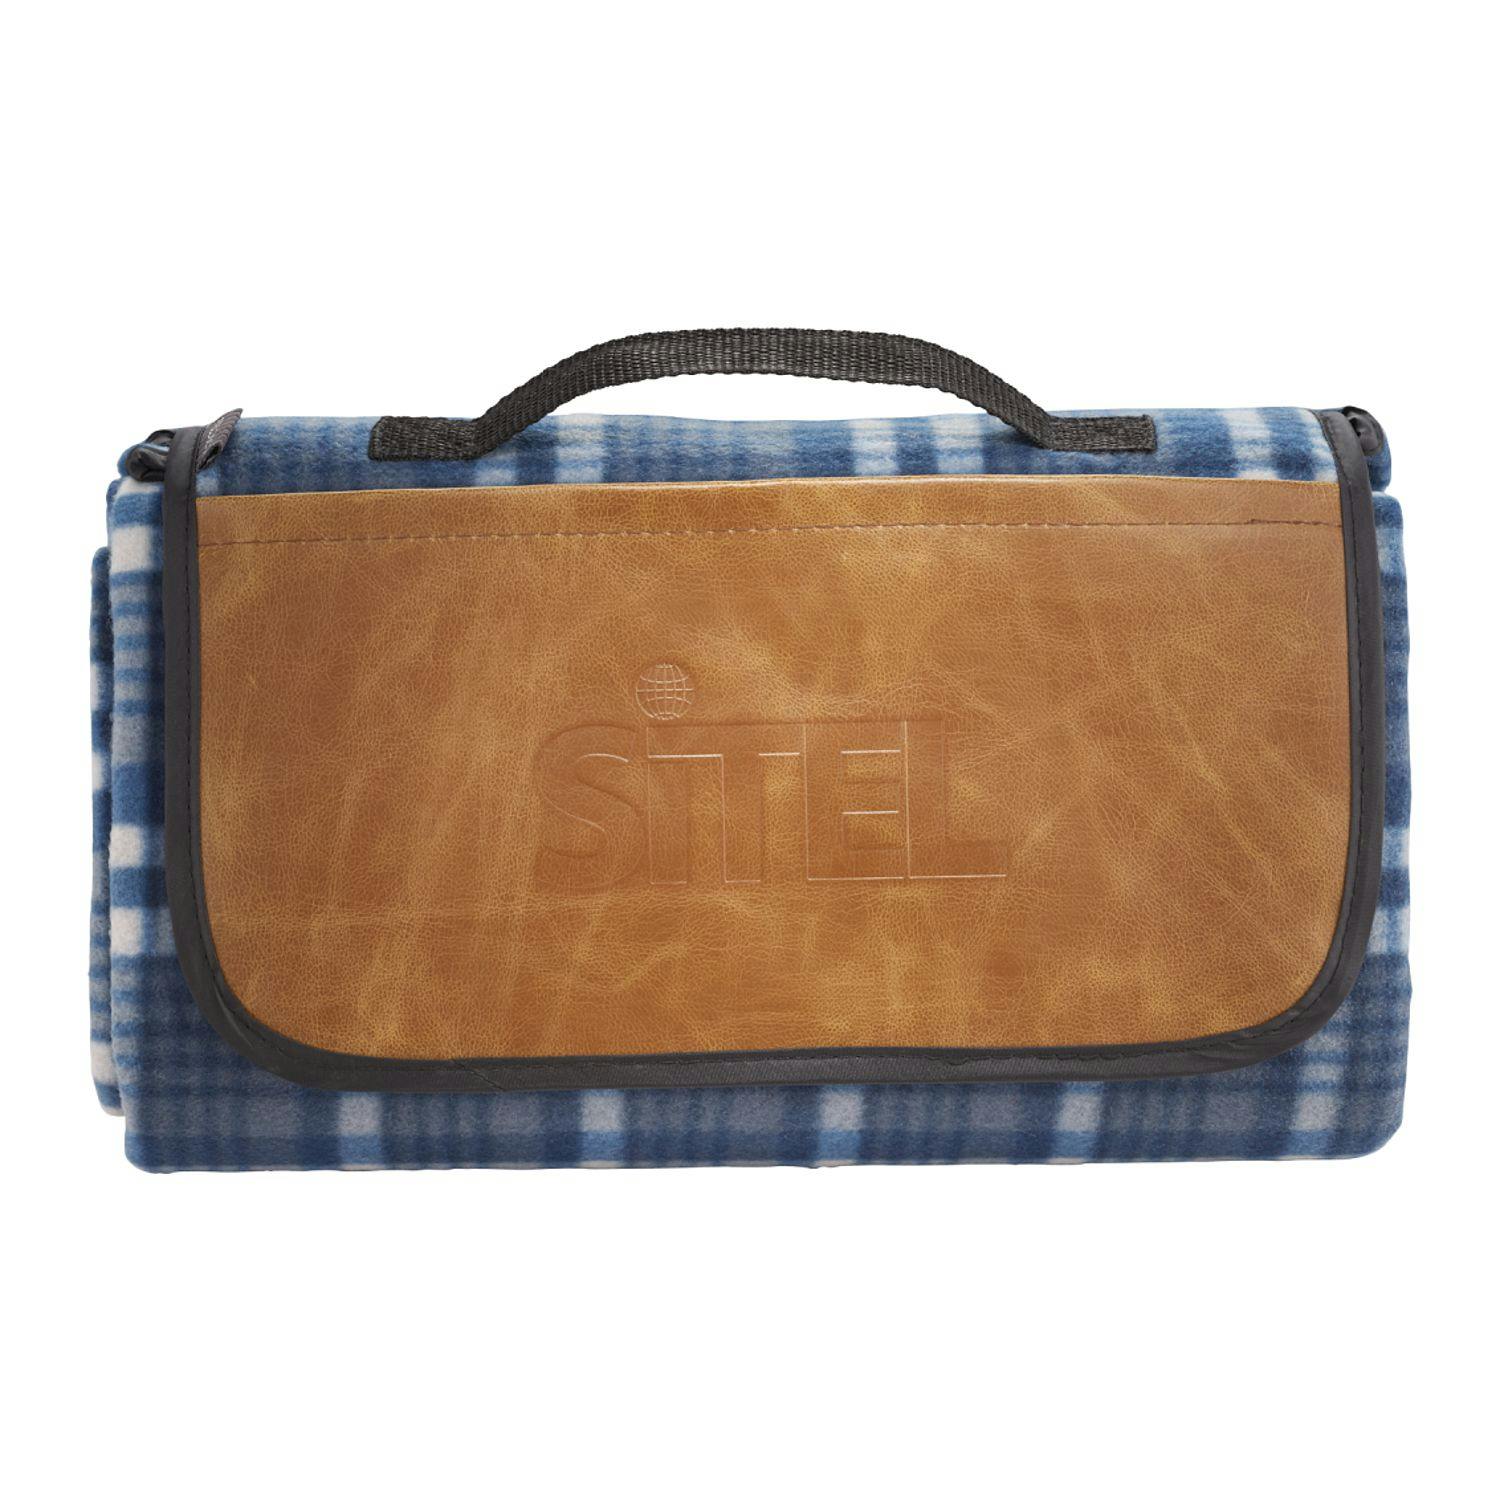 Field & Co.® Picnic Blanket - additional Image 1